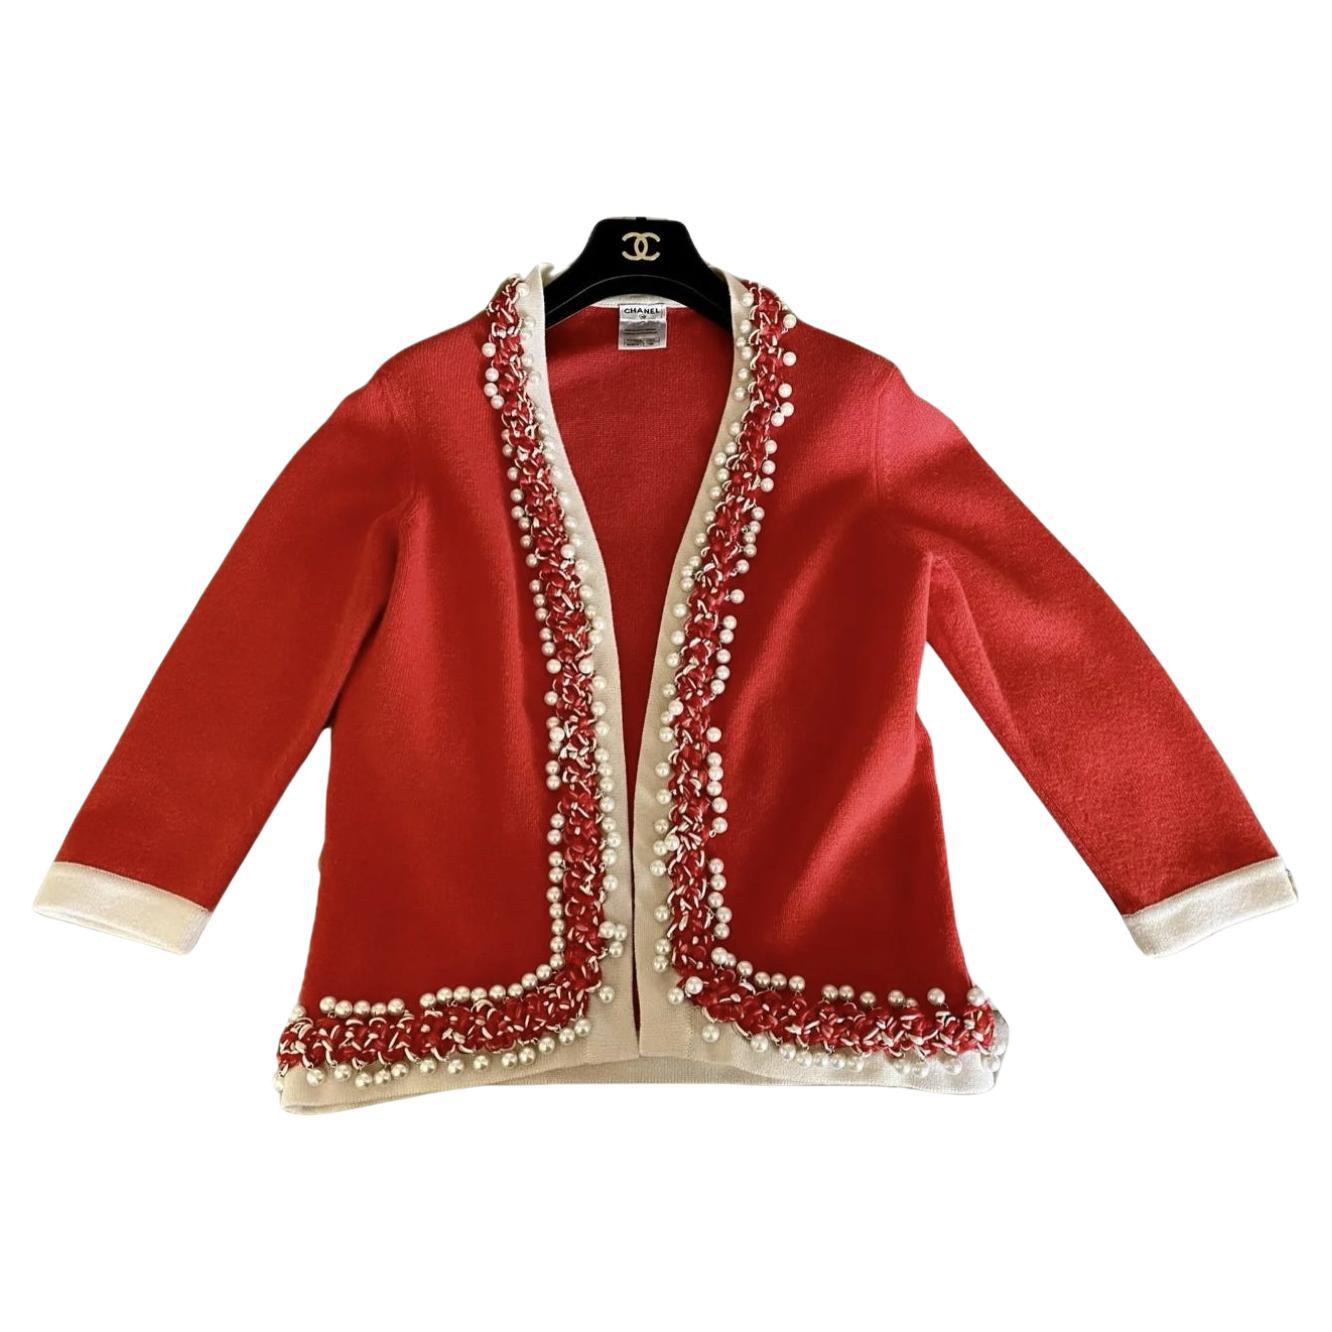 Stunning Chanel red cashmere jacket with jewel pearl embellishment 
Boutique price over 6,000 USD$
Size mark 38 FR. Kept unworn, condition of a new 